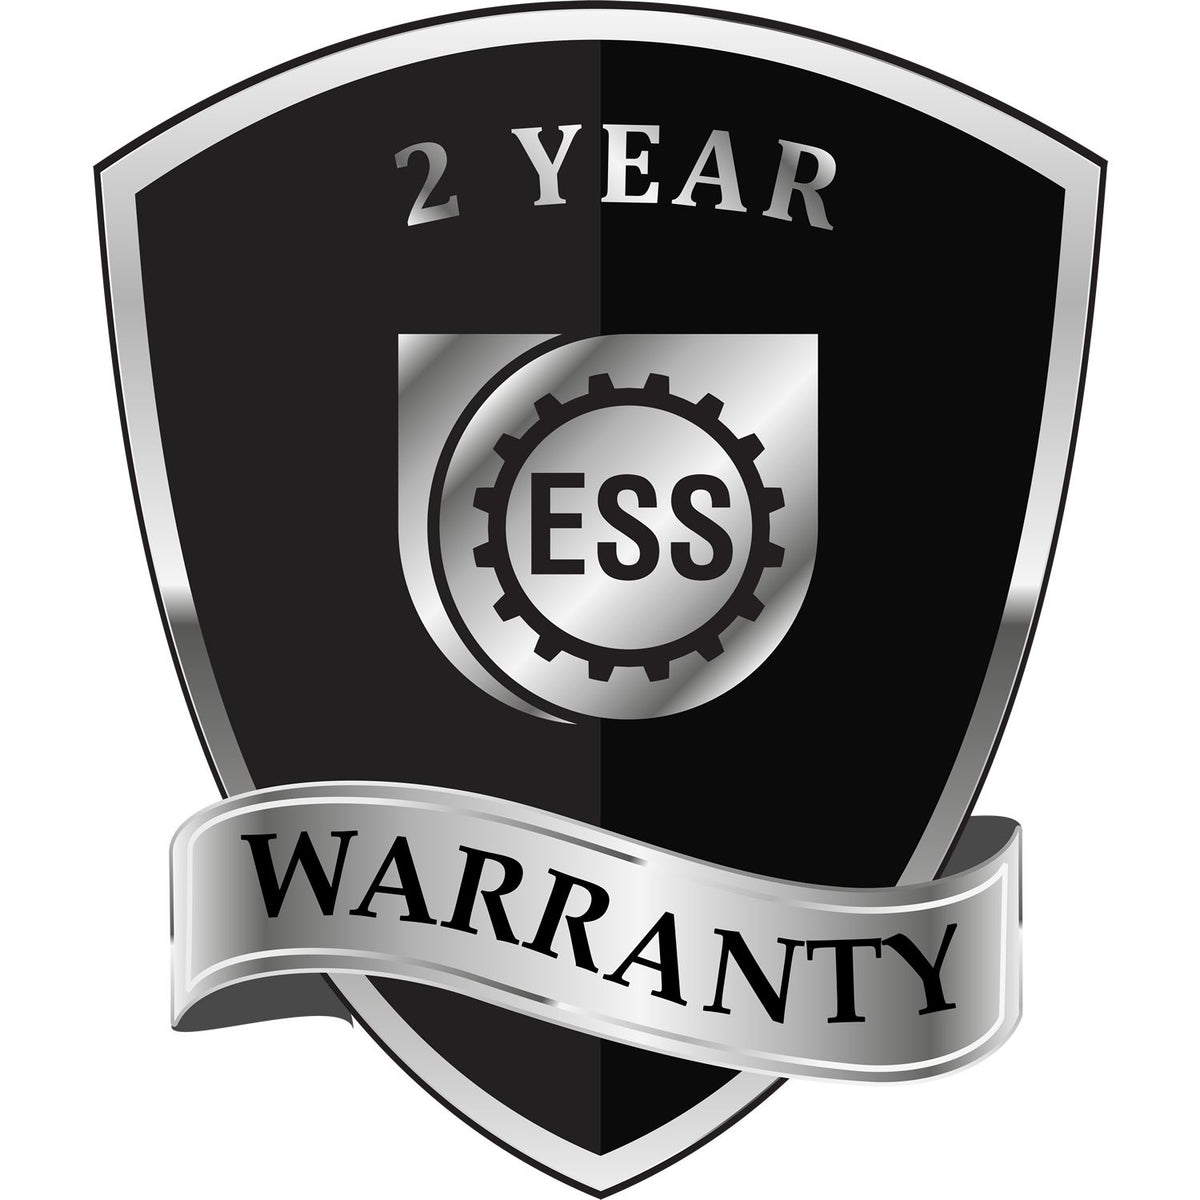 A black and silver badge or emblem showing warranty information for the Long Reach New Jersey Geology Seal